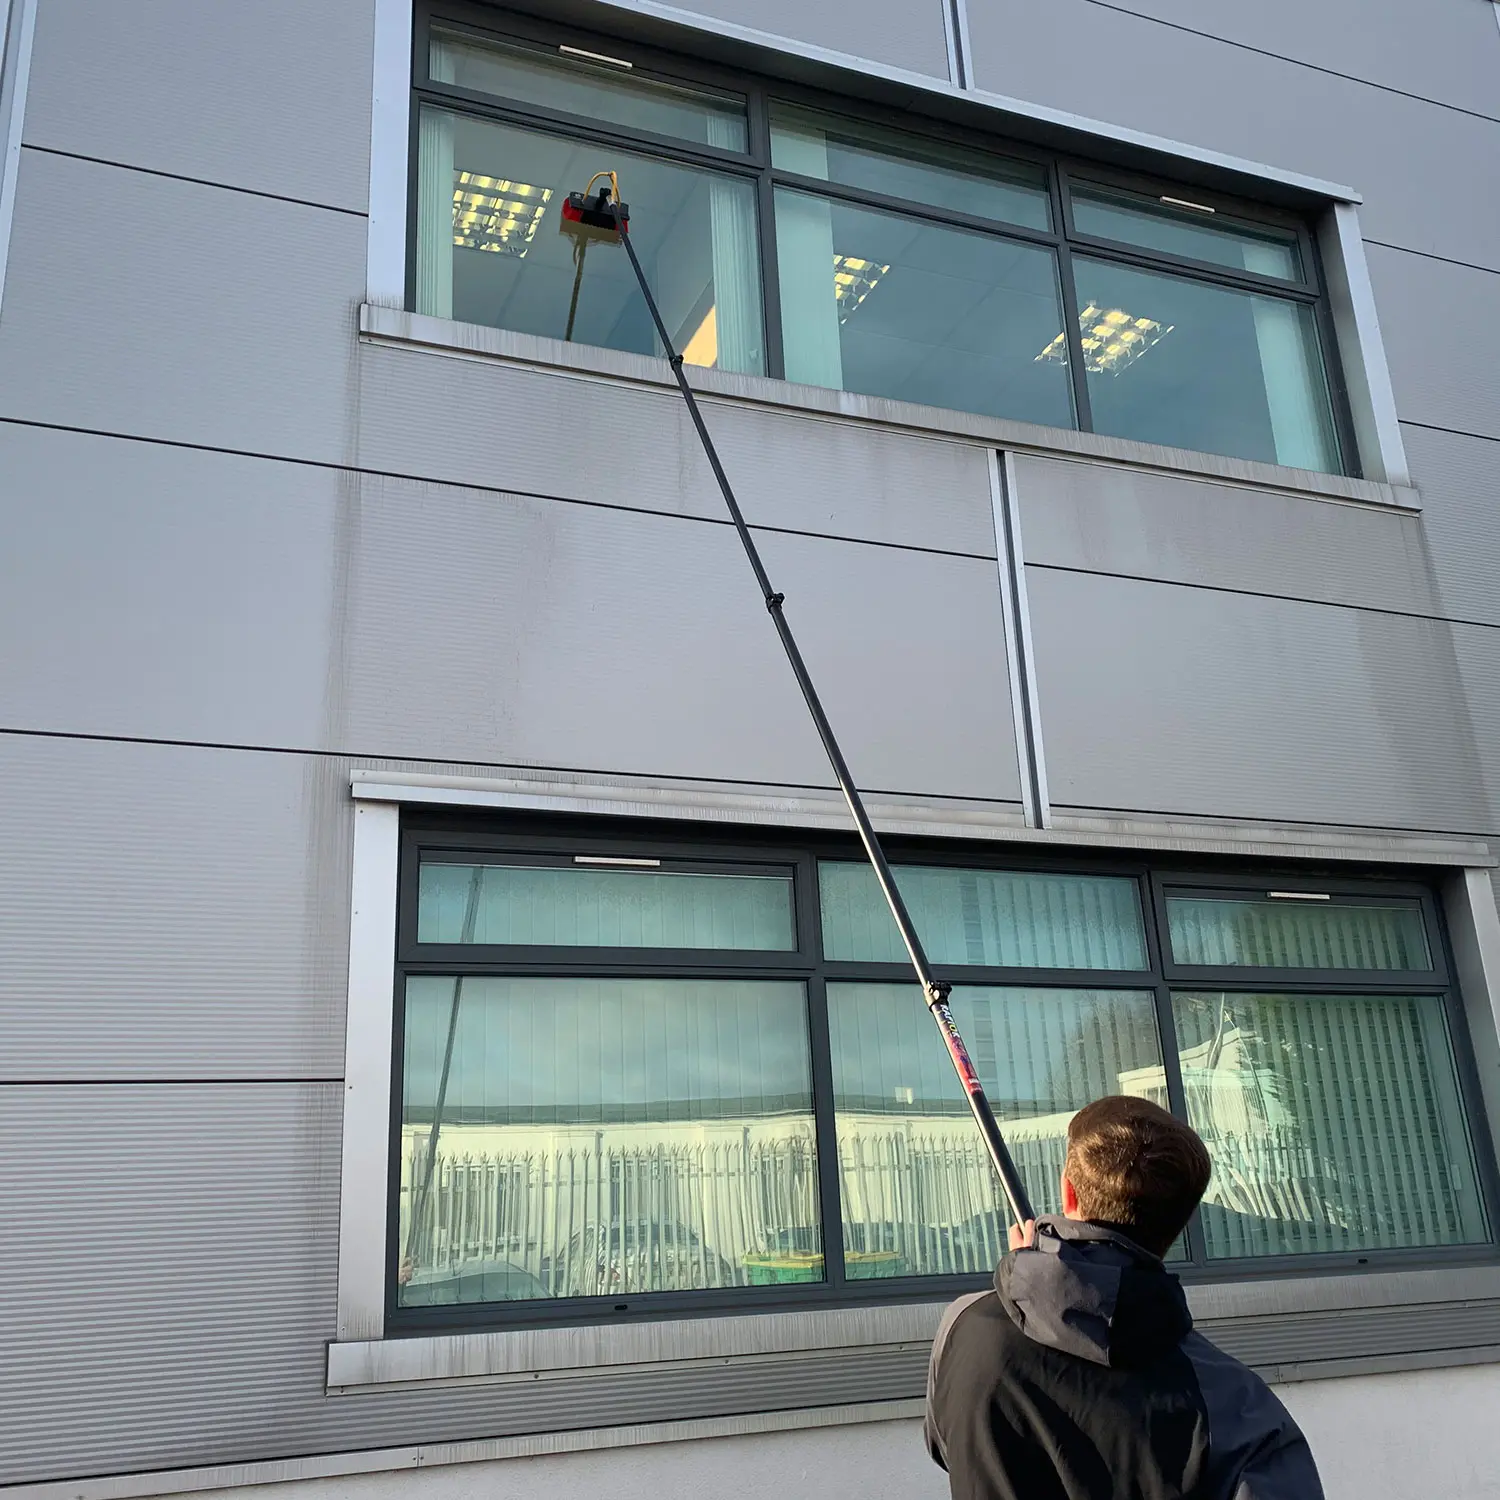 Professional Window Cleaners Employ Modern Technology to Ensure